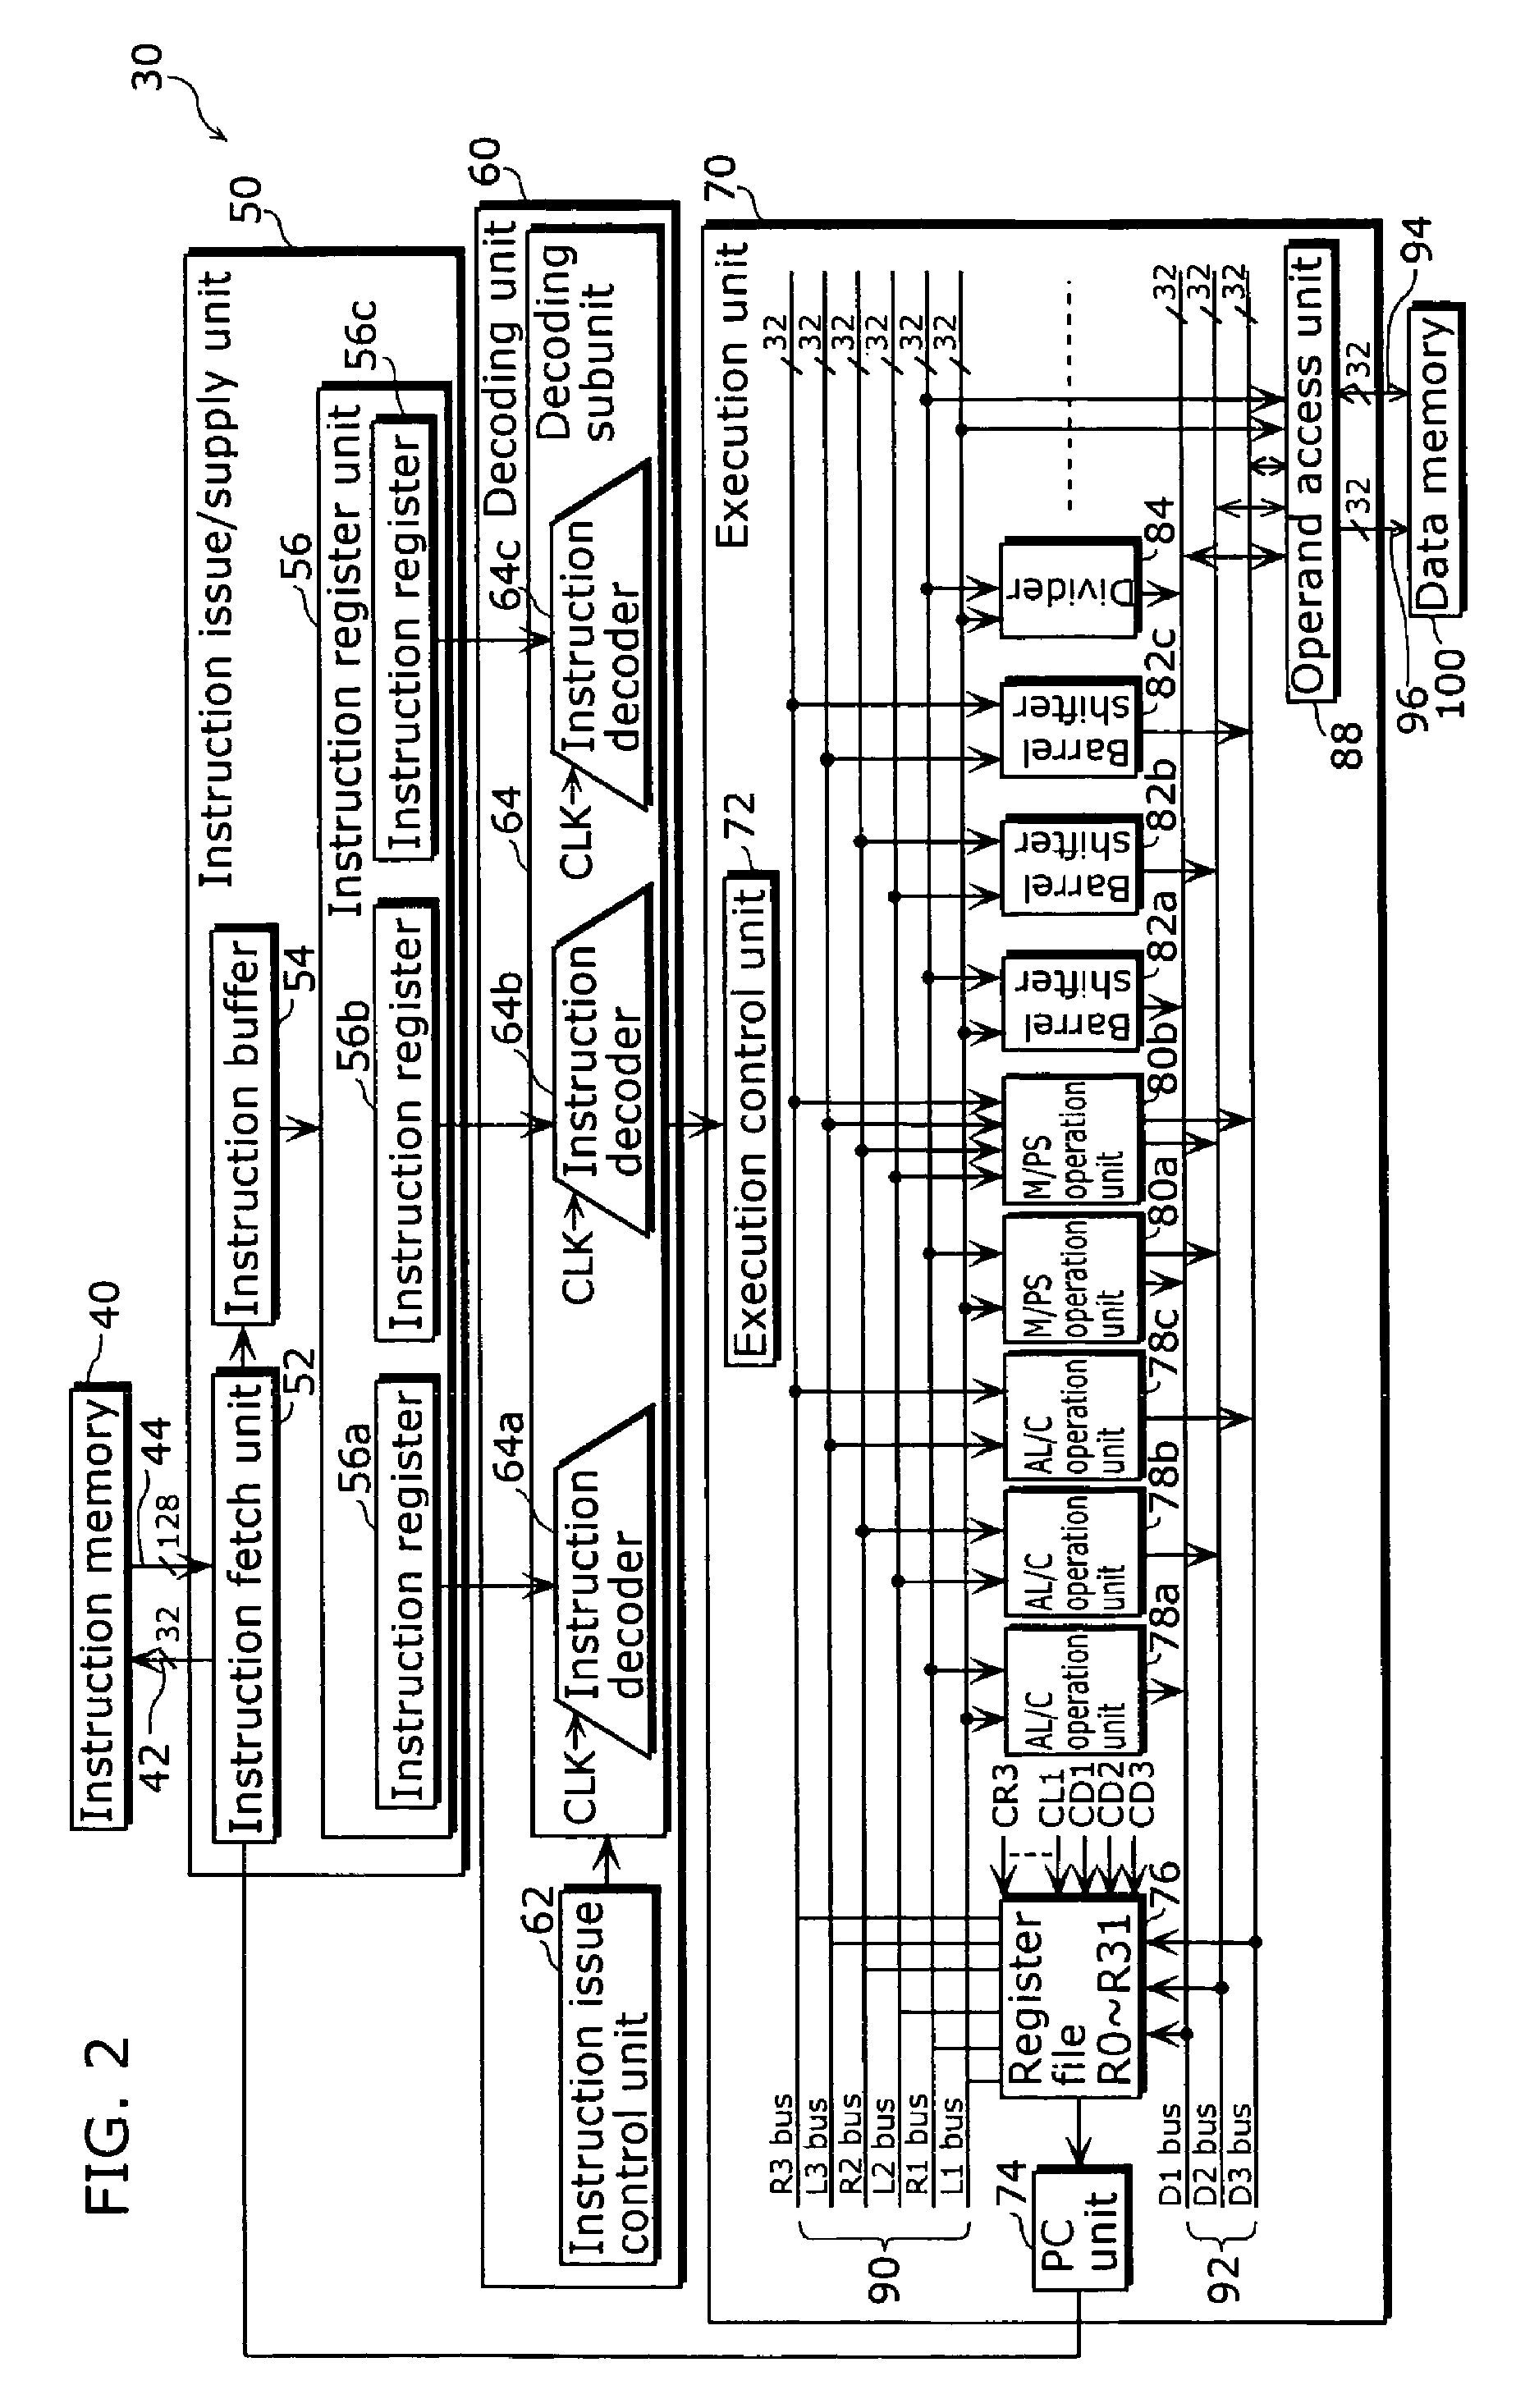 Compiler apparatus and method of optimizing a source program by reducing a hamming distance between two instructions